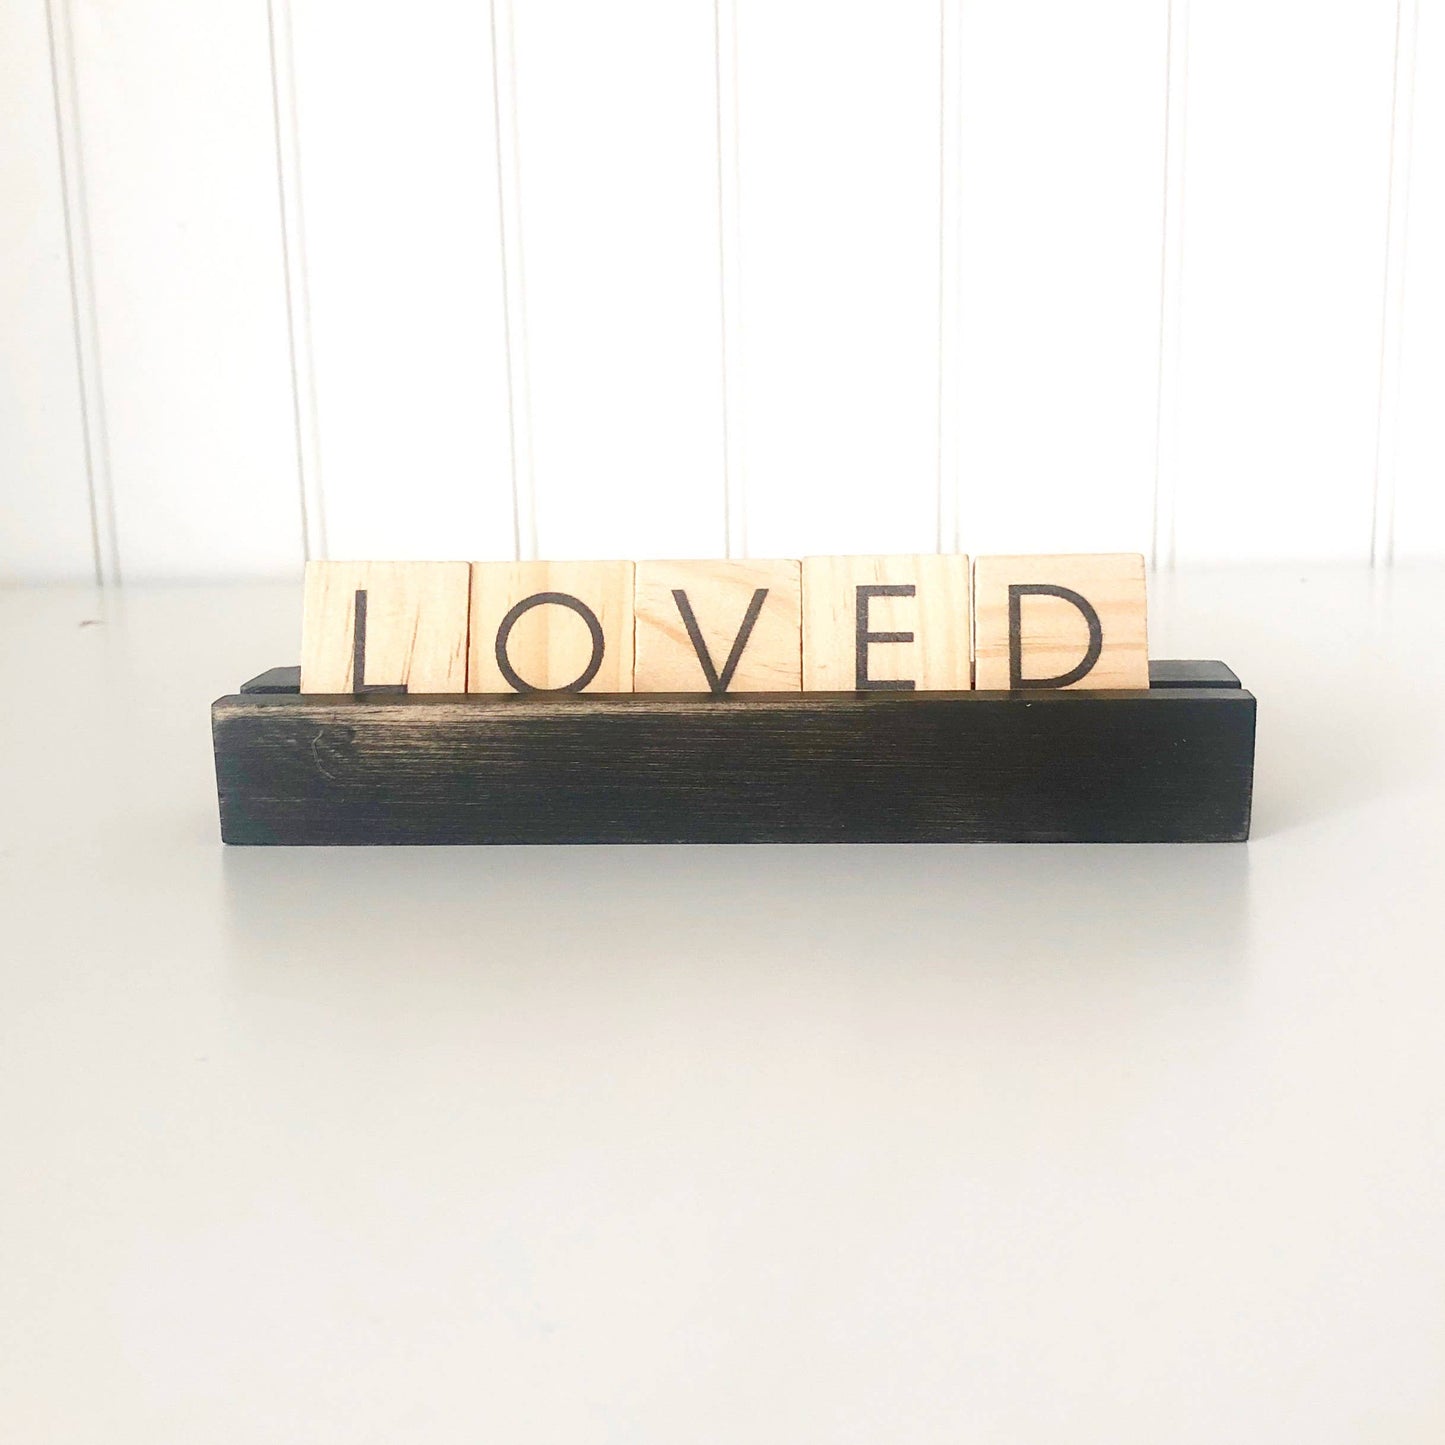 Foundations Decor Scrabble Tile Holders by Foundations Decor LLC - Gift